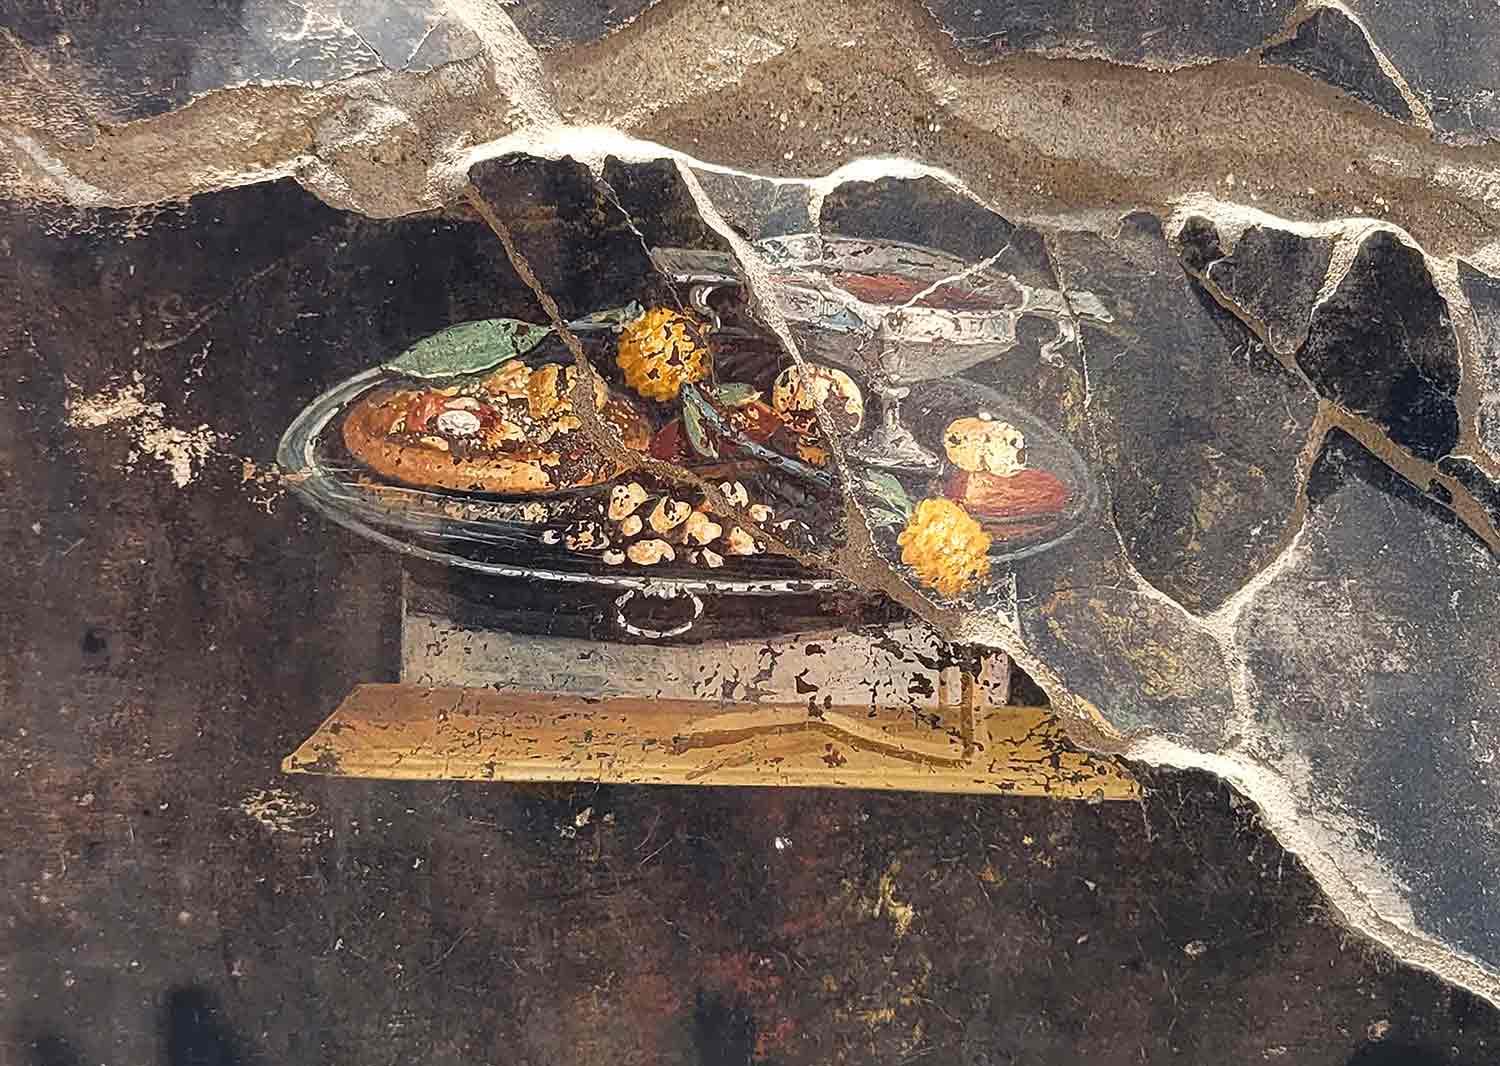 A closeup of a mural showing a tray of food, including an item that looks like a pizza.